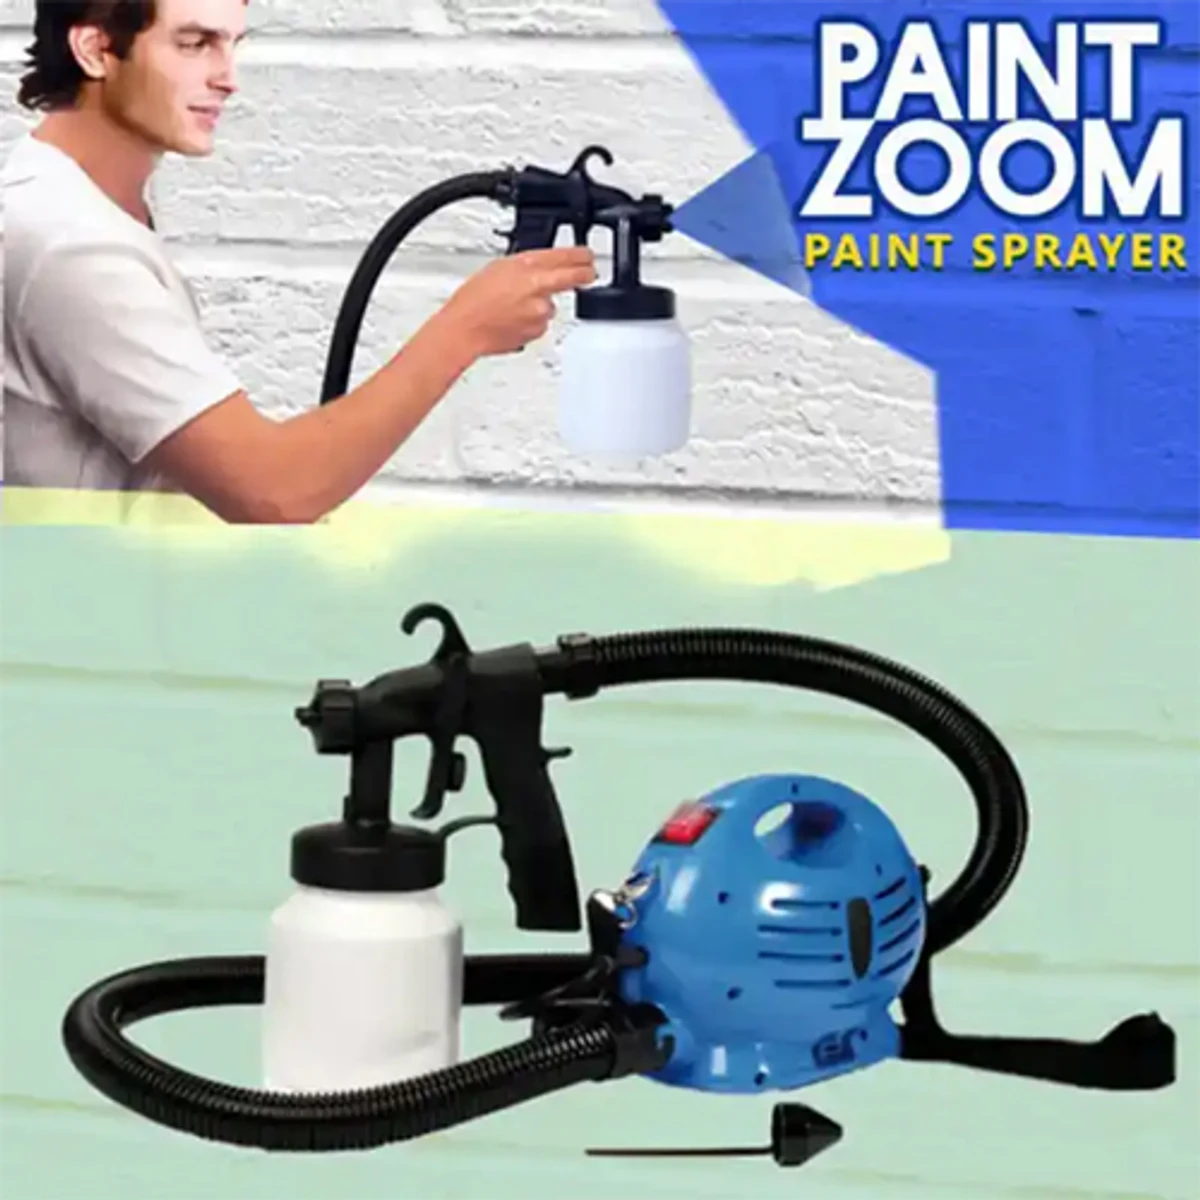 Product details of Paint Zoom Professional Electric Paint Sprayer – Blue and Black